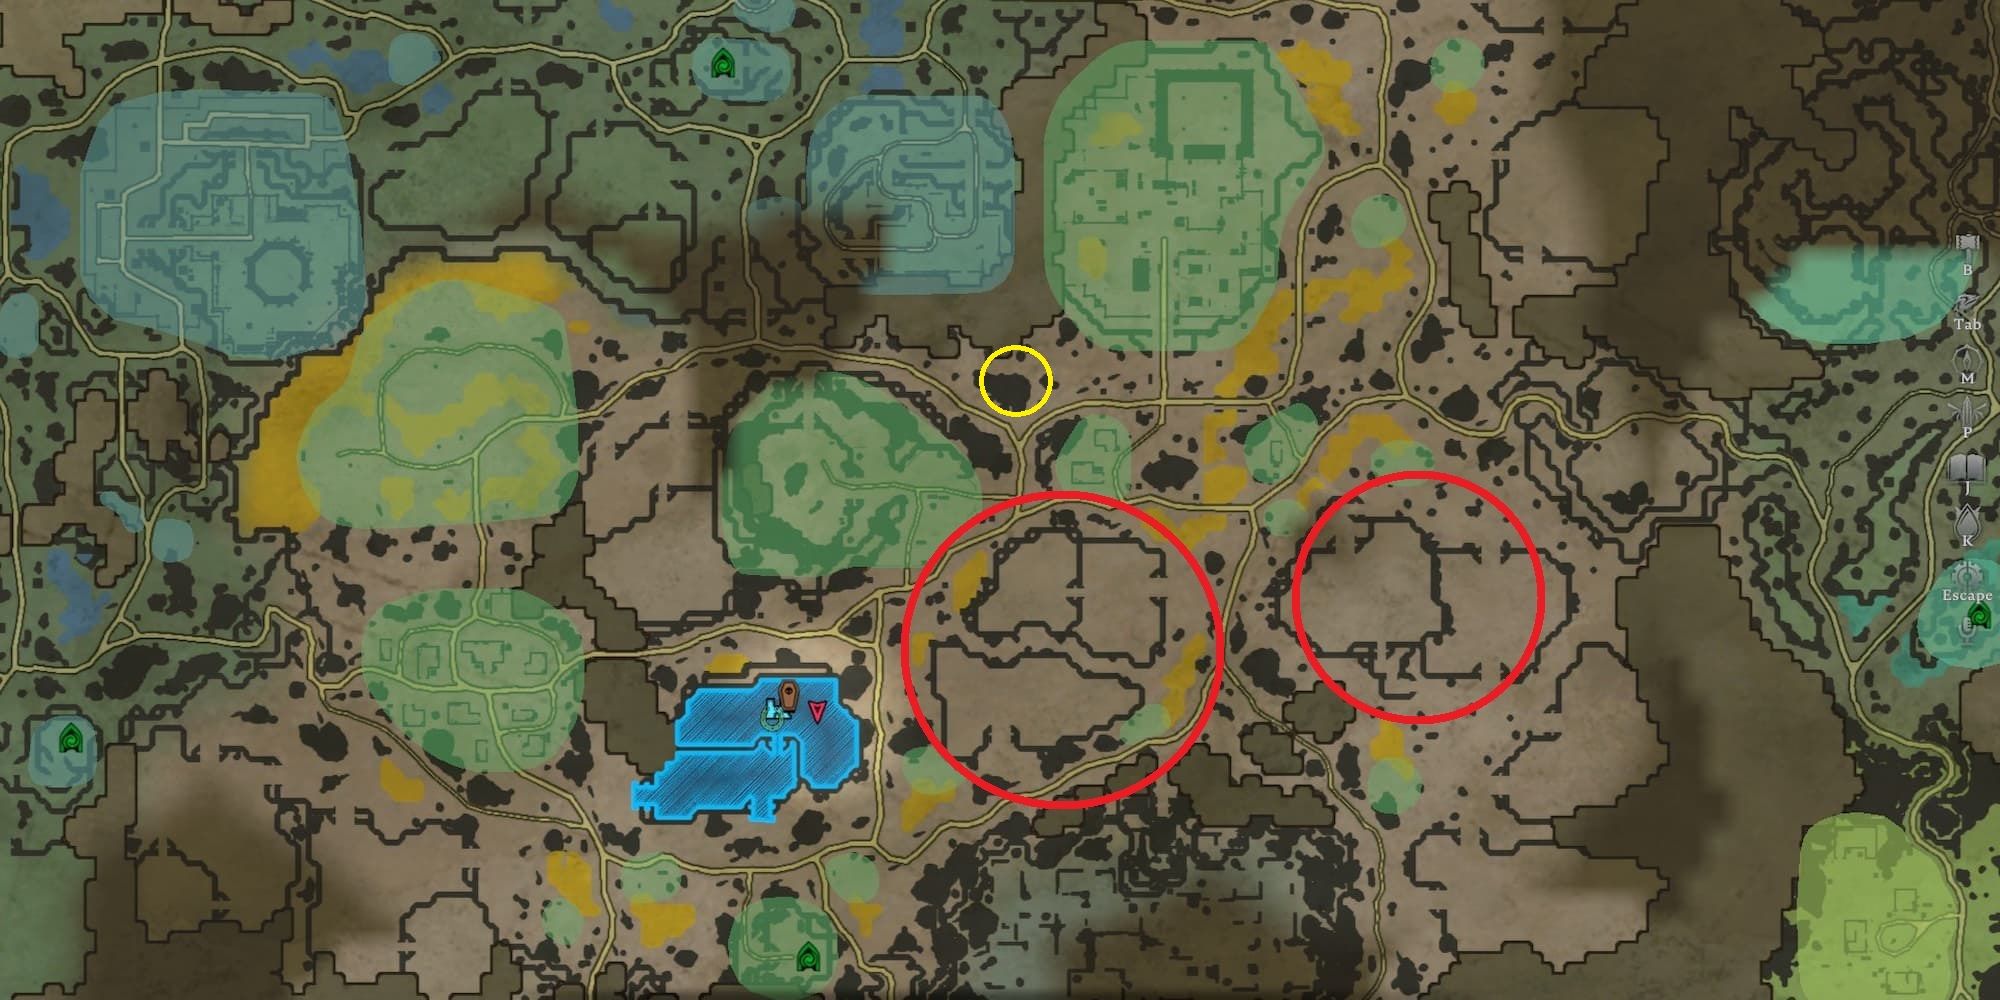 Southern Gloomrot base locations in V Rising 